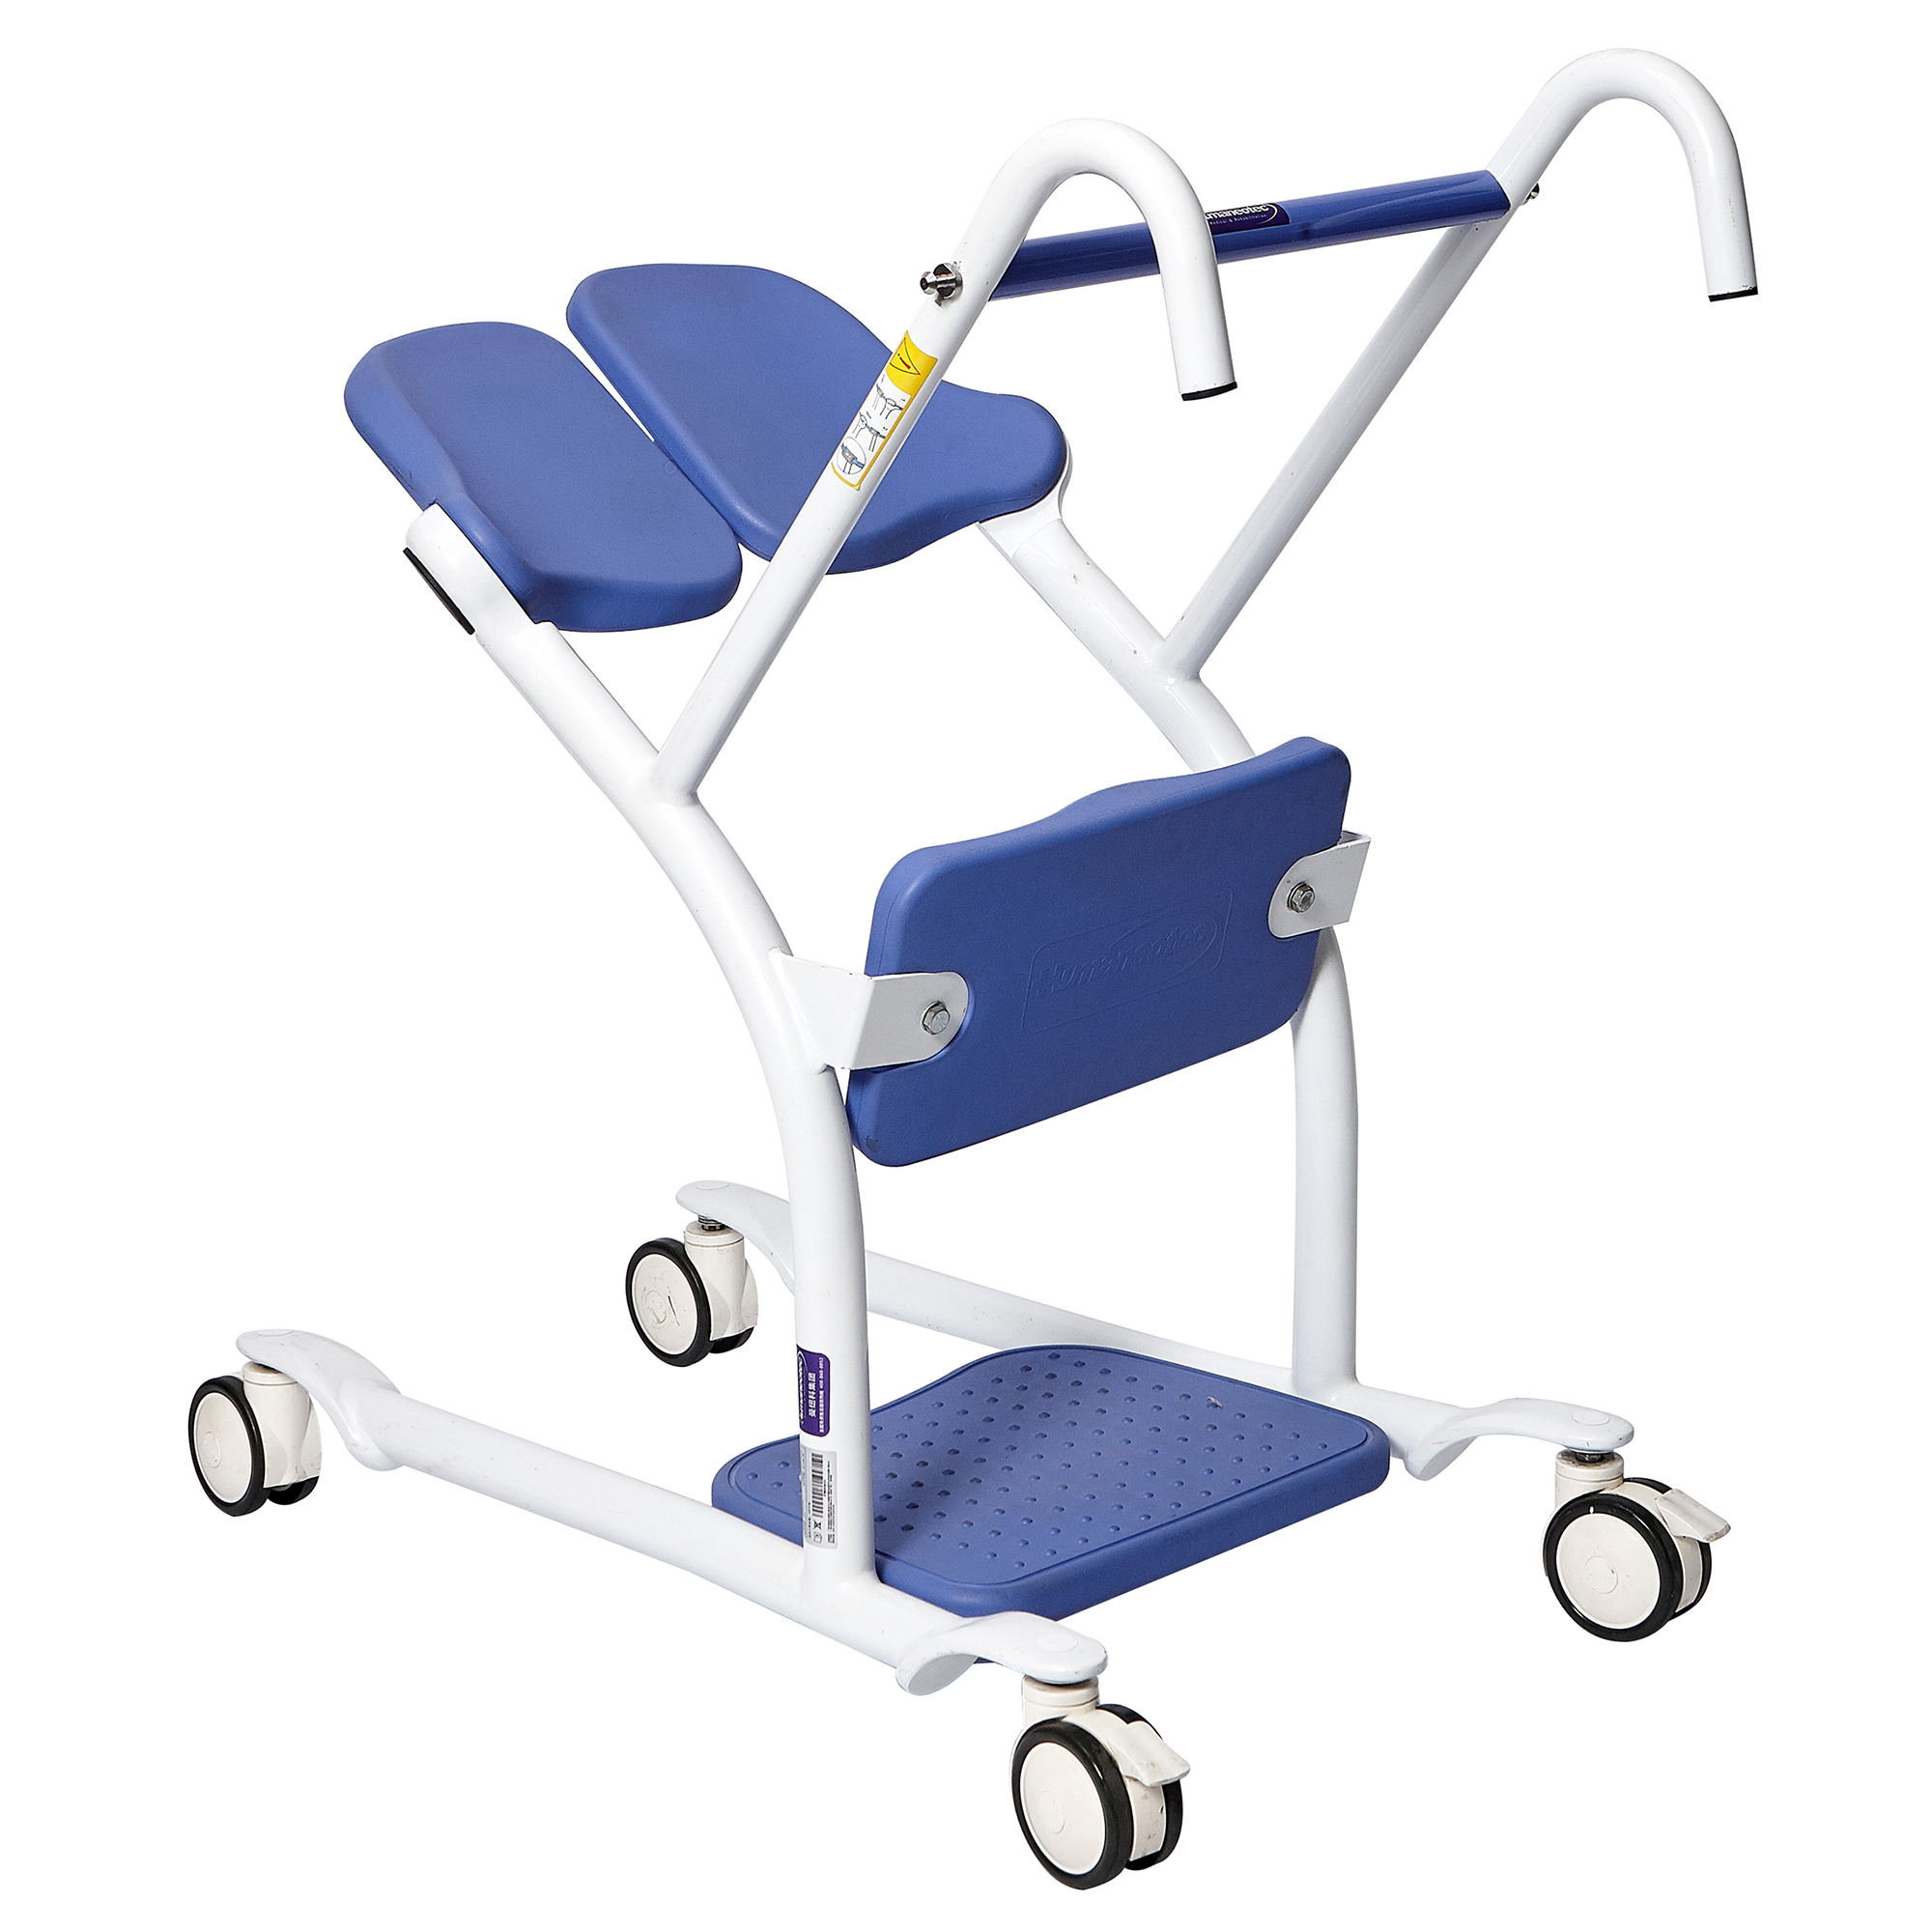 Wholesale RE-001 Patient Assist Lift Chair for Hospital and Home Care